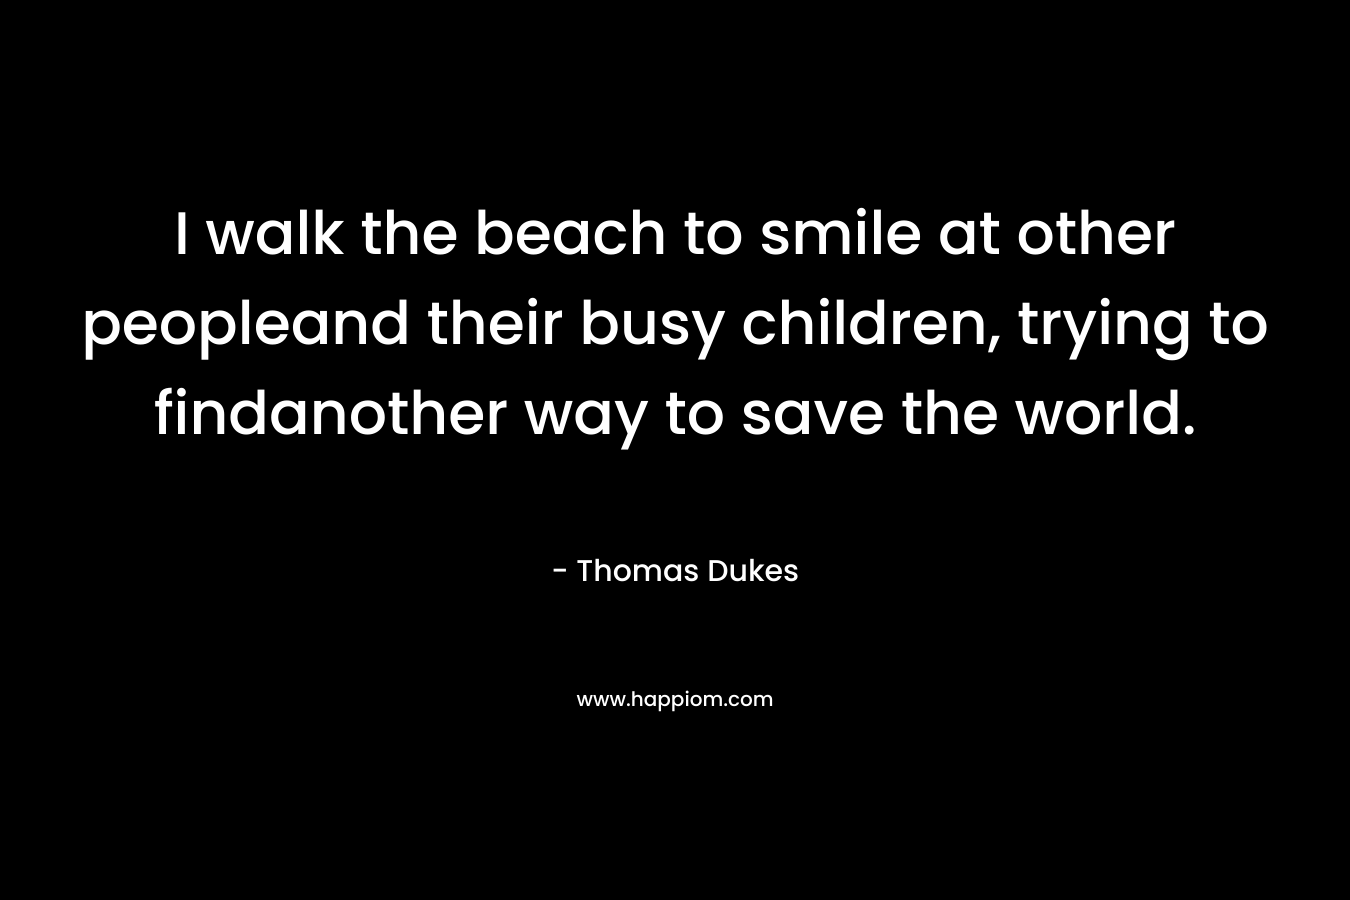 I walk the beach to smile at other peopleand their busy children, trying to findanother way to save the world.